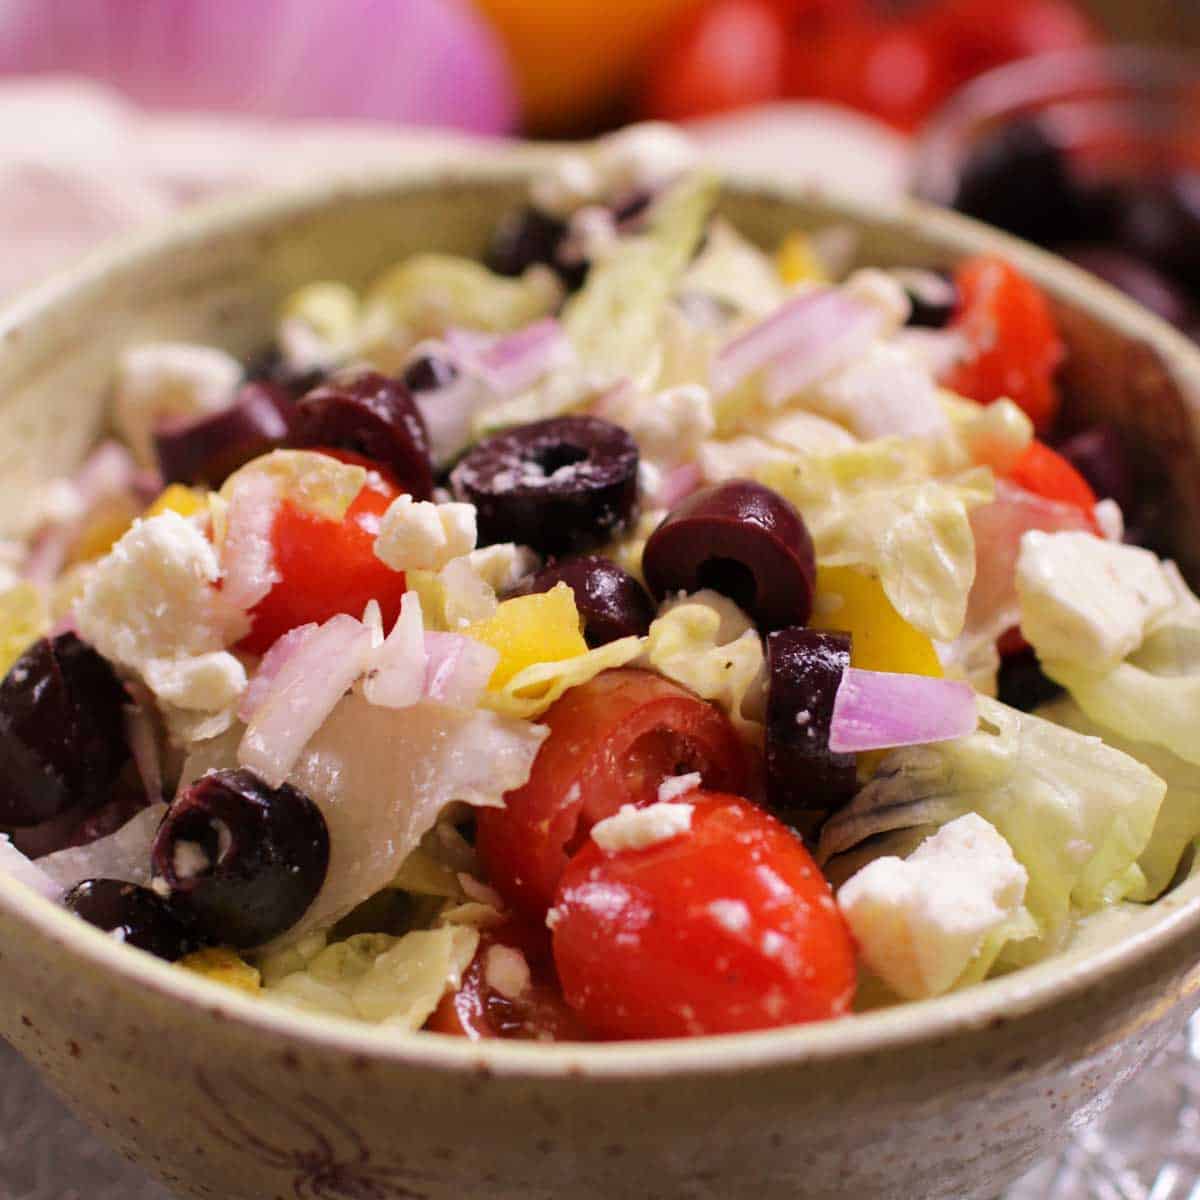 A close up of a Greek salad in a bowl with cherry tomatoes, feta, olives, chopped red onions on a bed of chopped lettuce.